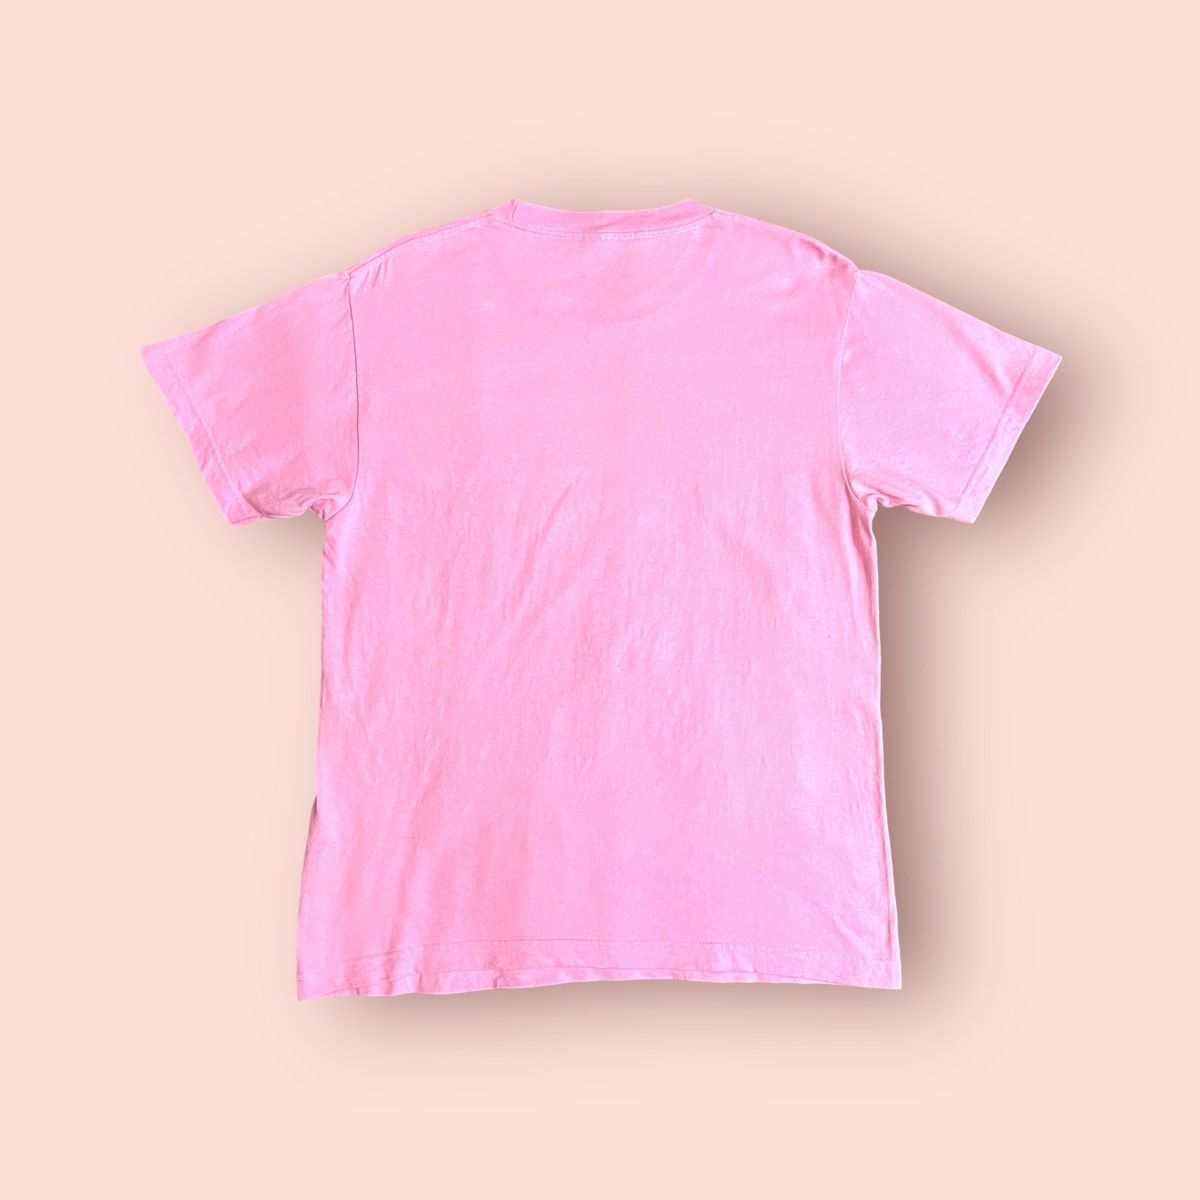 Japanese Brand LIMITED EDITION 2019 GUNDAM X HELLO KITTY PINK TEE IN PINK Size US M / EU 48-50 / 2 - 5 Thumbnail